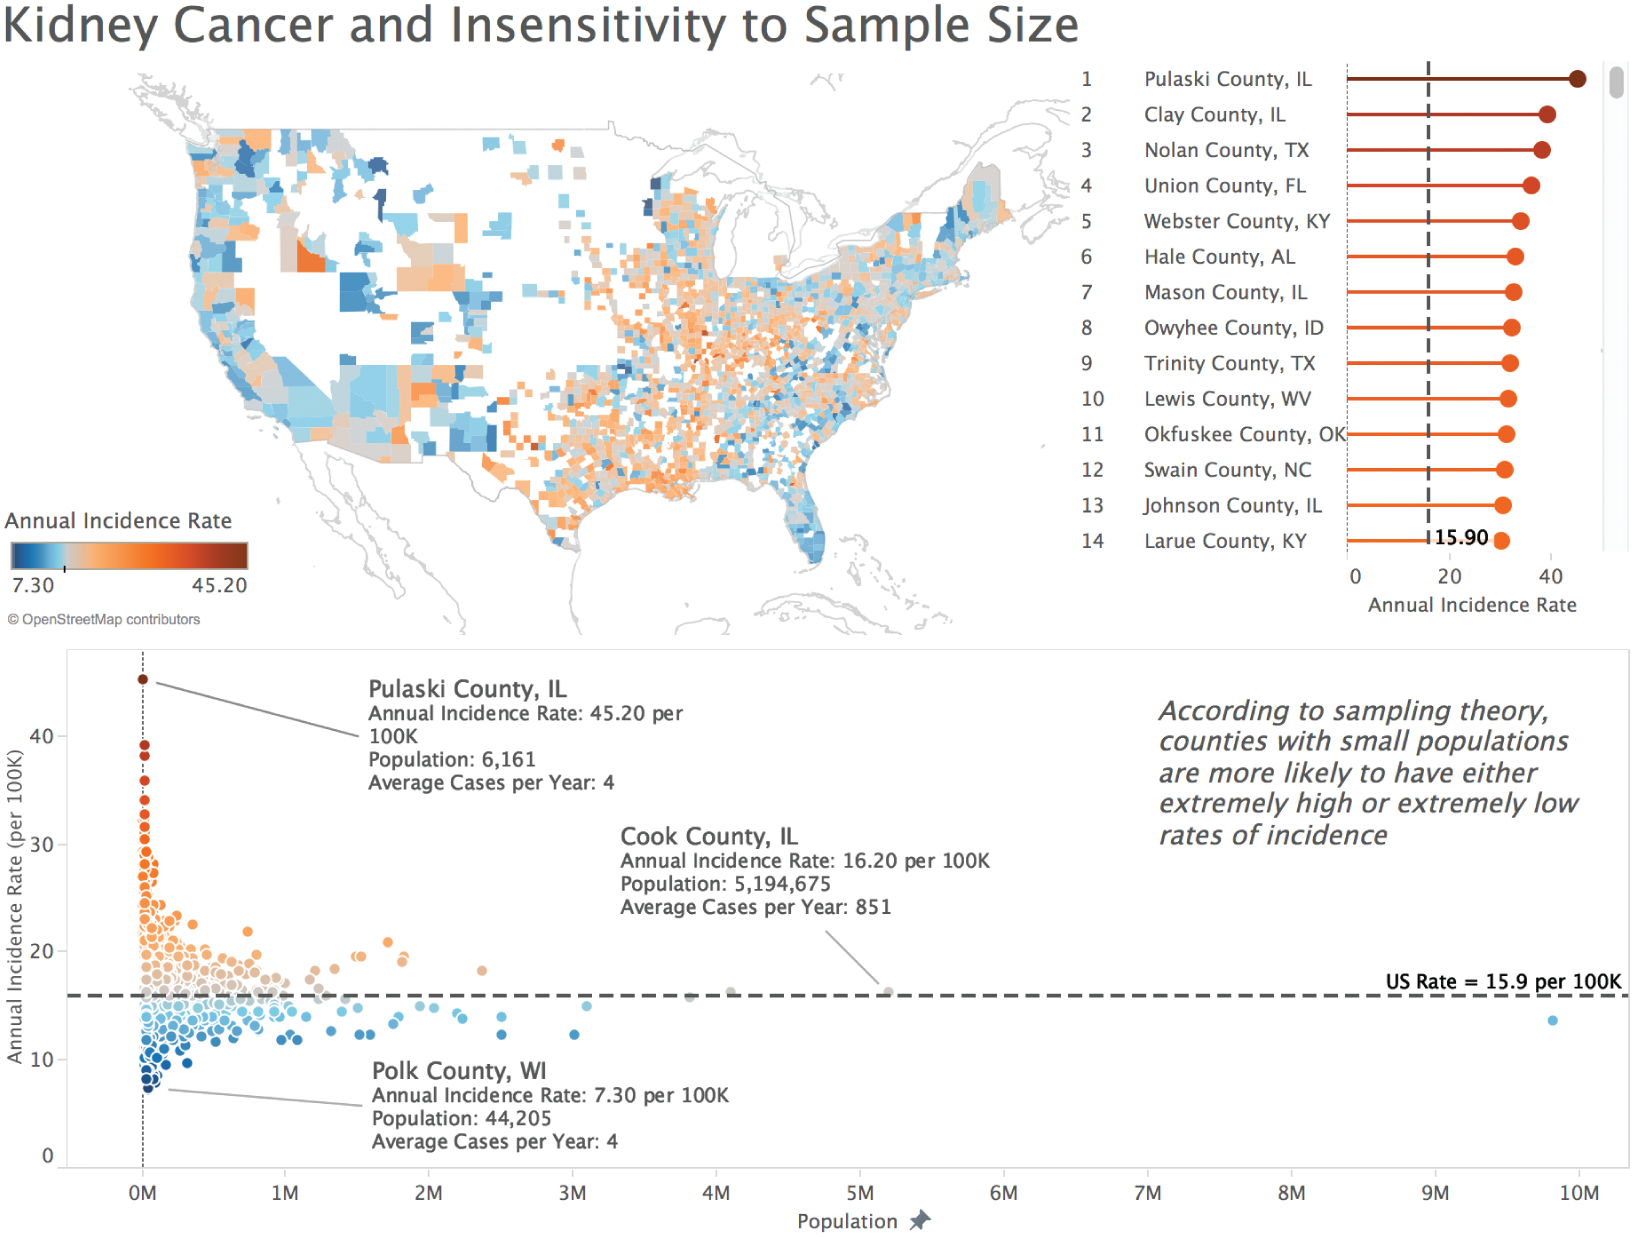 Illustration of an interactive dashboard to find kidney cancer rate figures, and insensitivity to sample size.